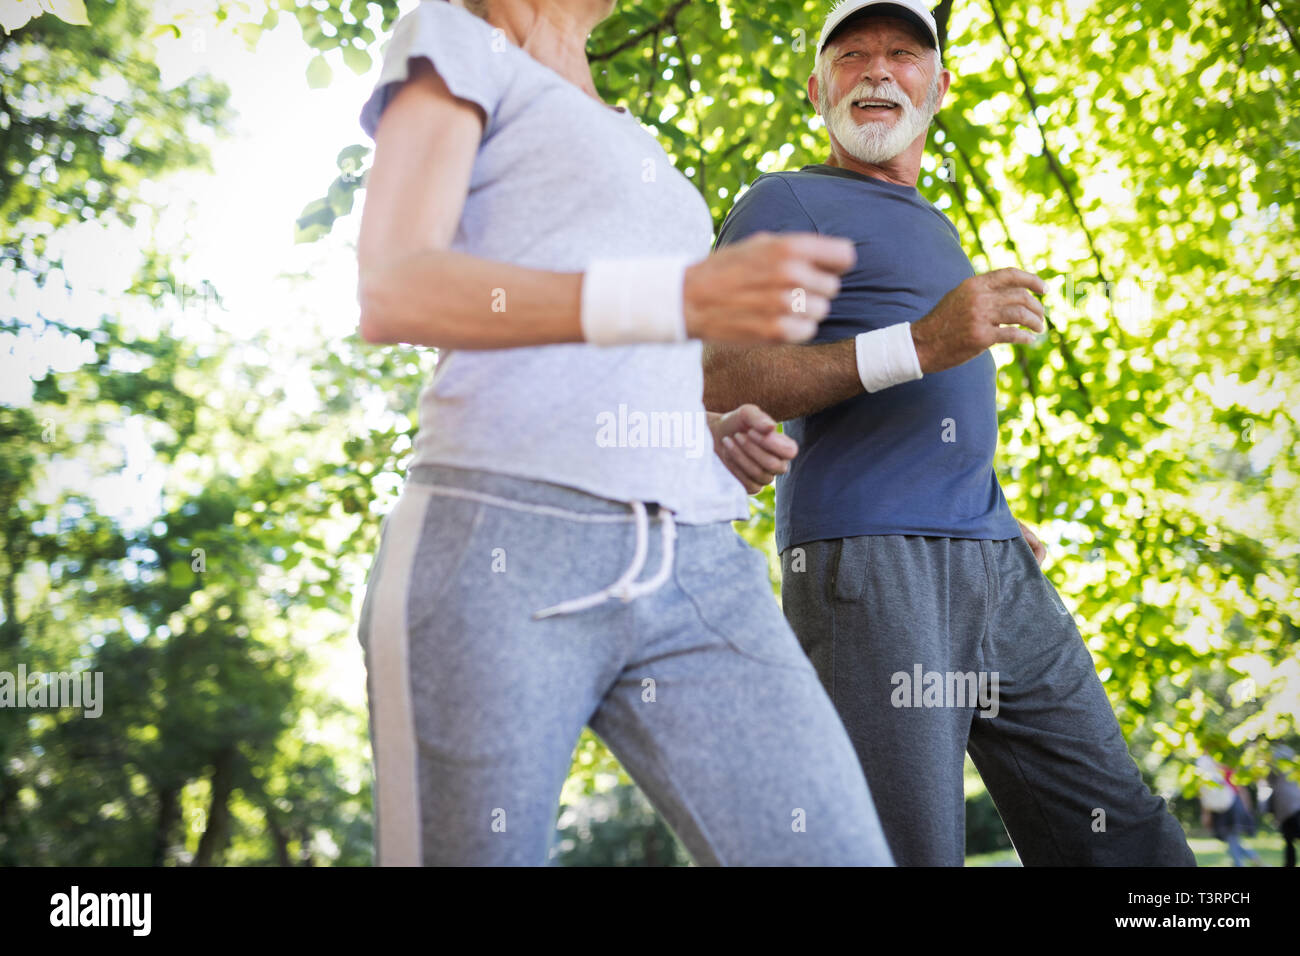 Fitness, sport, people, exercising and lifestyle concept - senior couple running Stock Photo